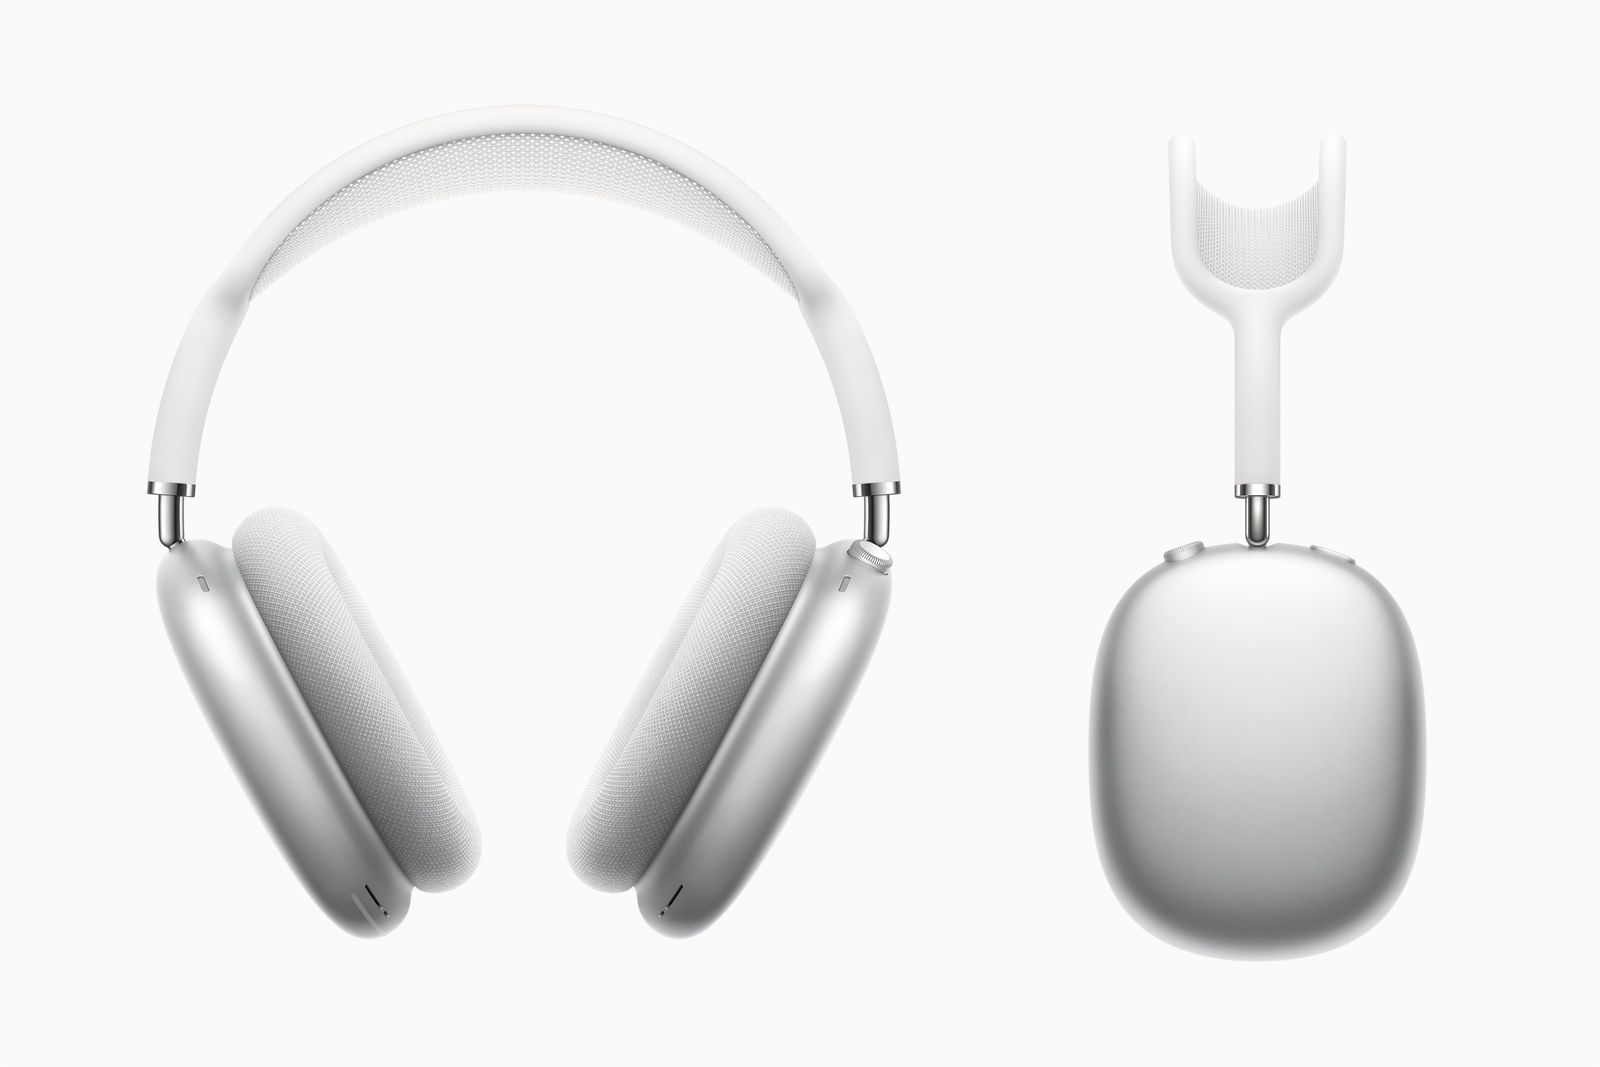 Apple AirPods Max headphones: All you need to know photo 1